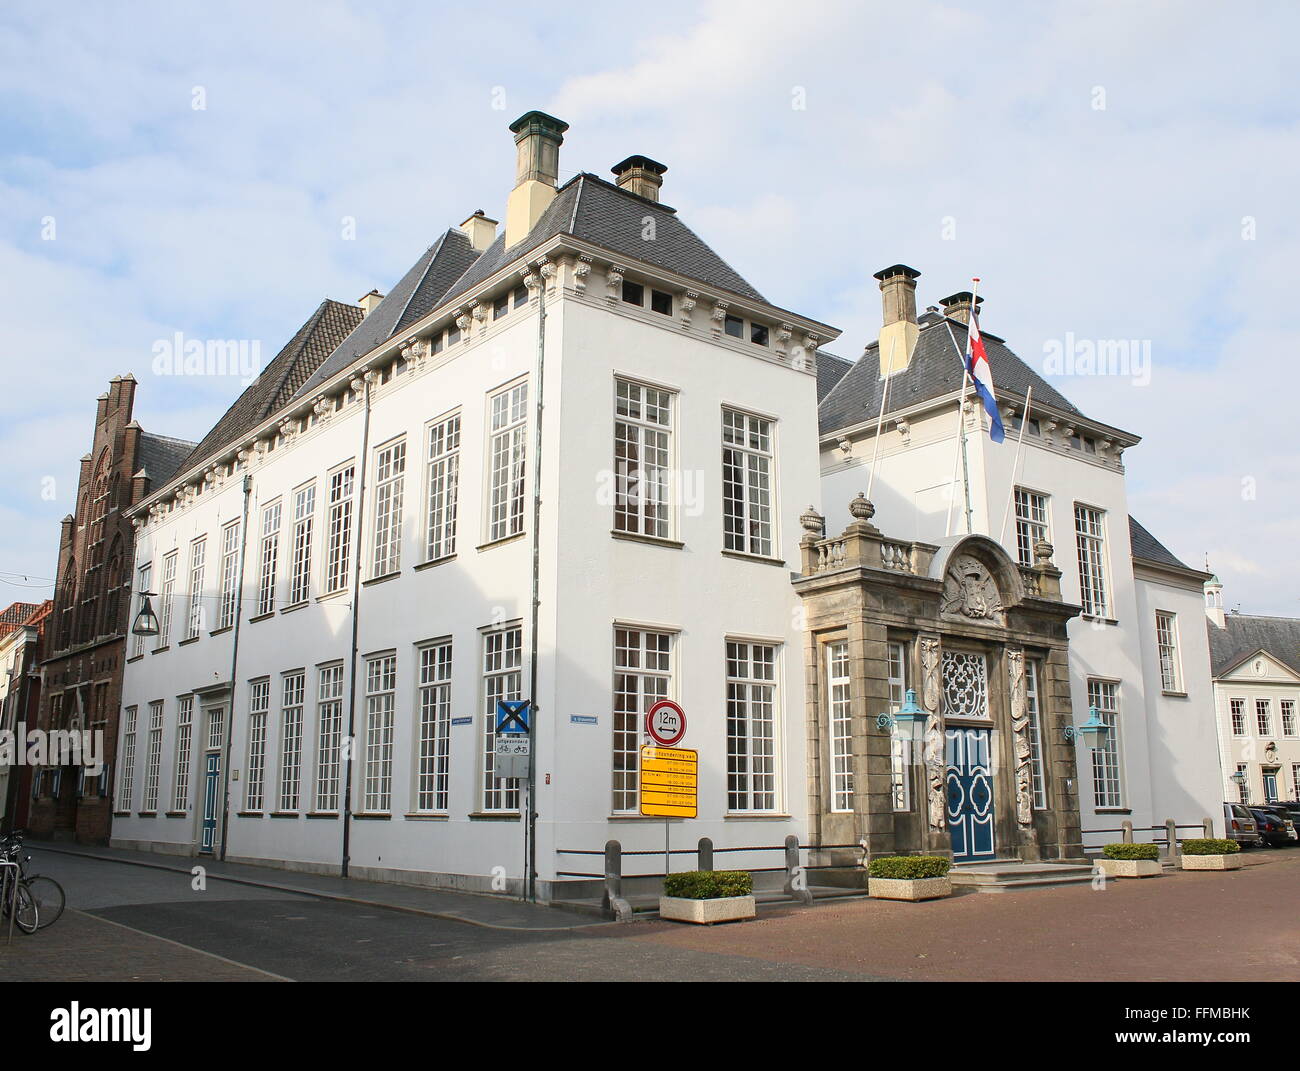 Former City Hall in the old city of Zutphen, Gelderland (Guelders province), The Netherlands Stock Photo